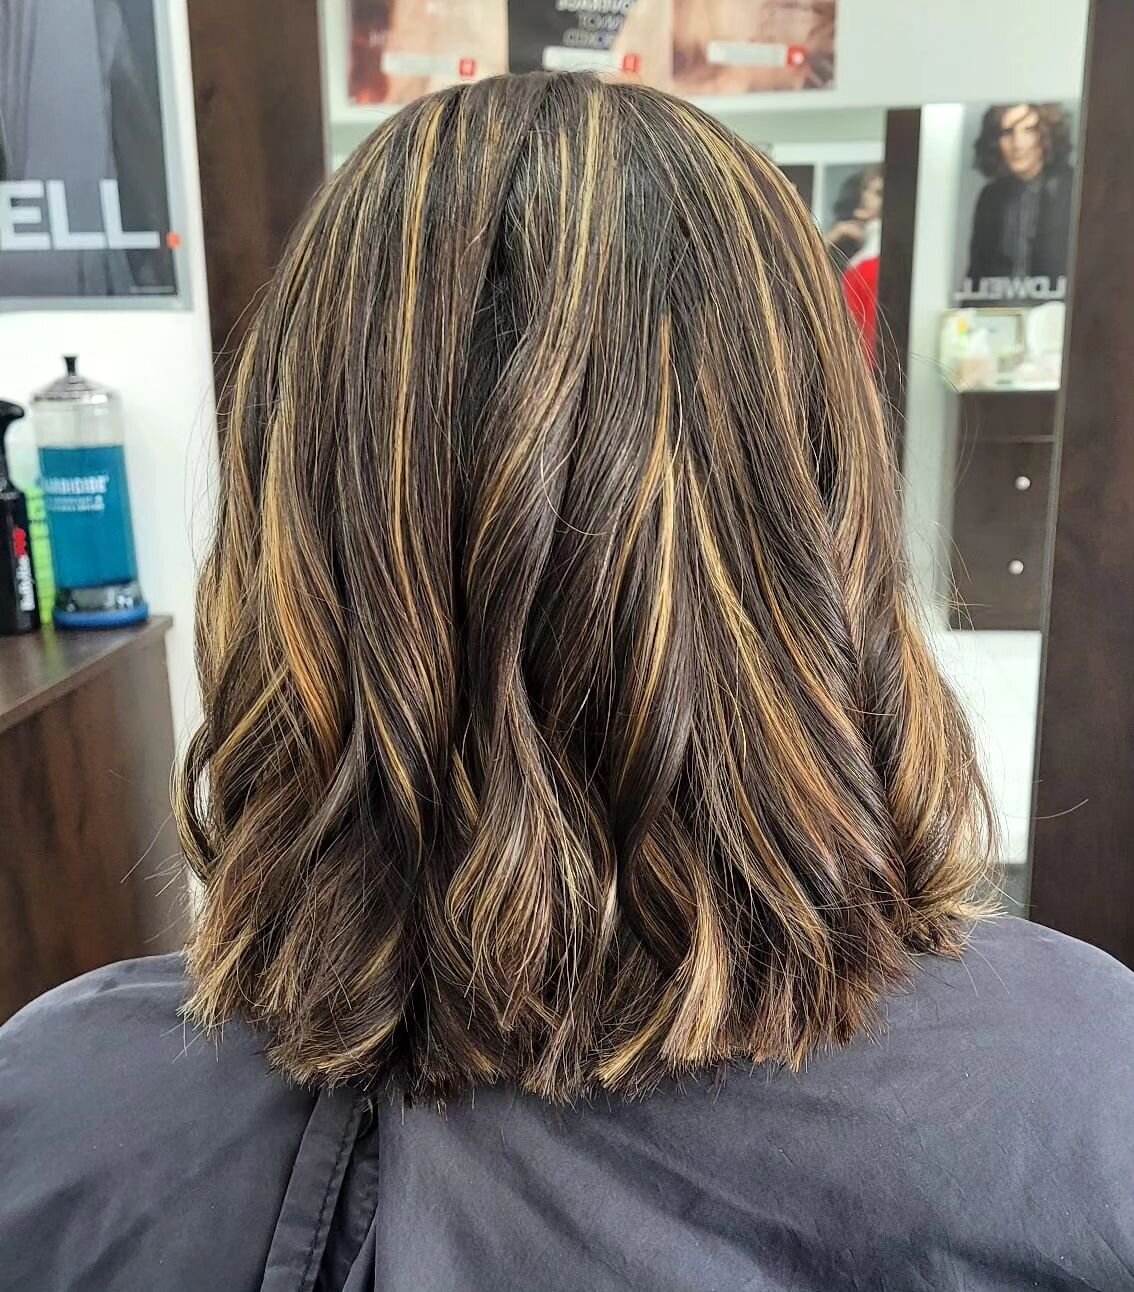 ✨️Hair Cut &amp; Style✨️

Gorgeous hair styling done at Beauty Addix Hair Salon &amp; Spa! 

🚨 Need a hair service done? New to Beauty Addix? We're pleased to announce our offer of 25% OFF for new hair clients. LIMITED AVAILABILITY, so you don't wan